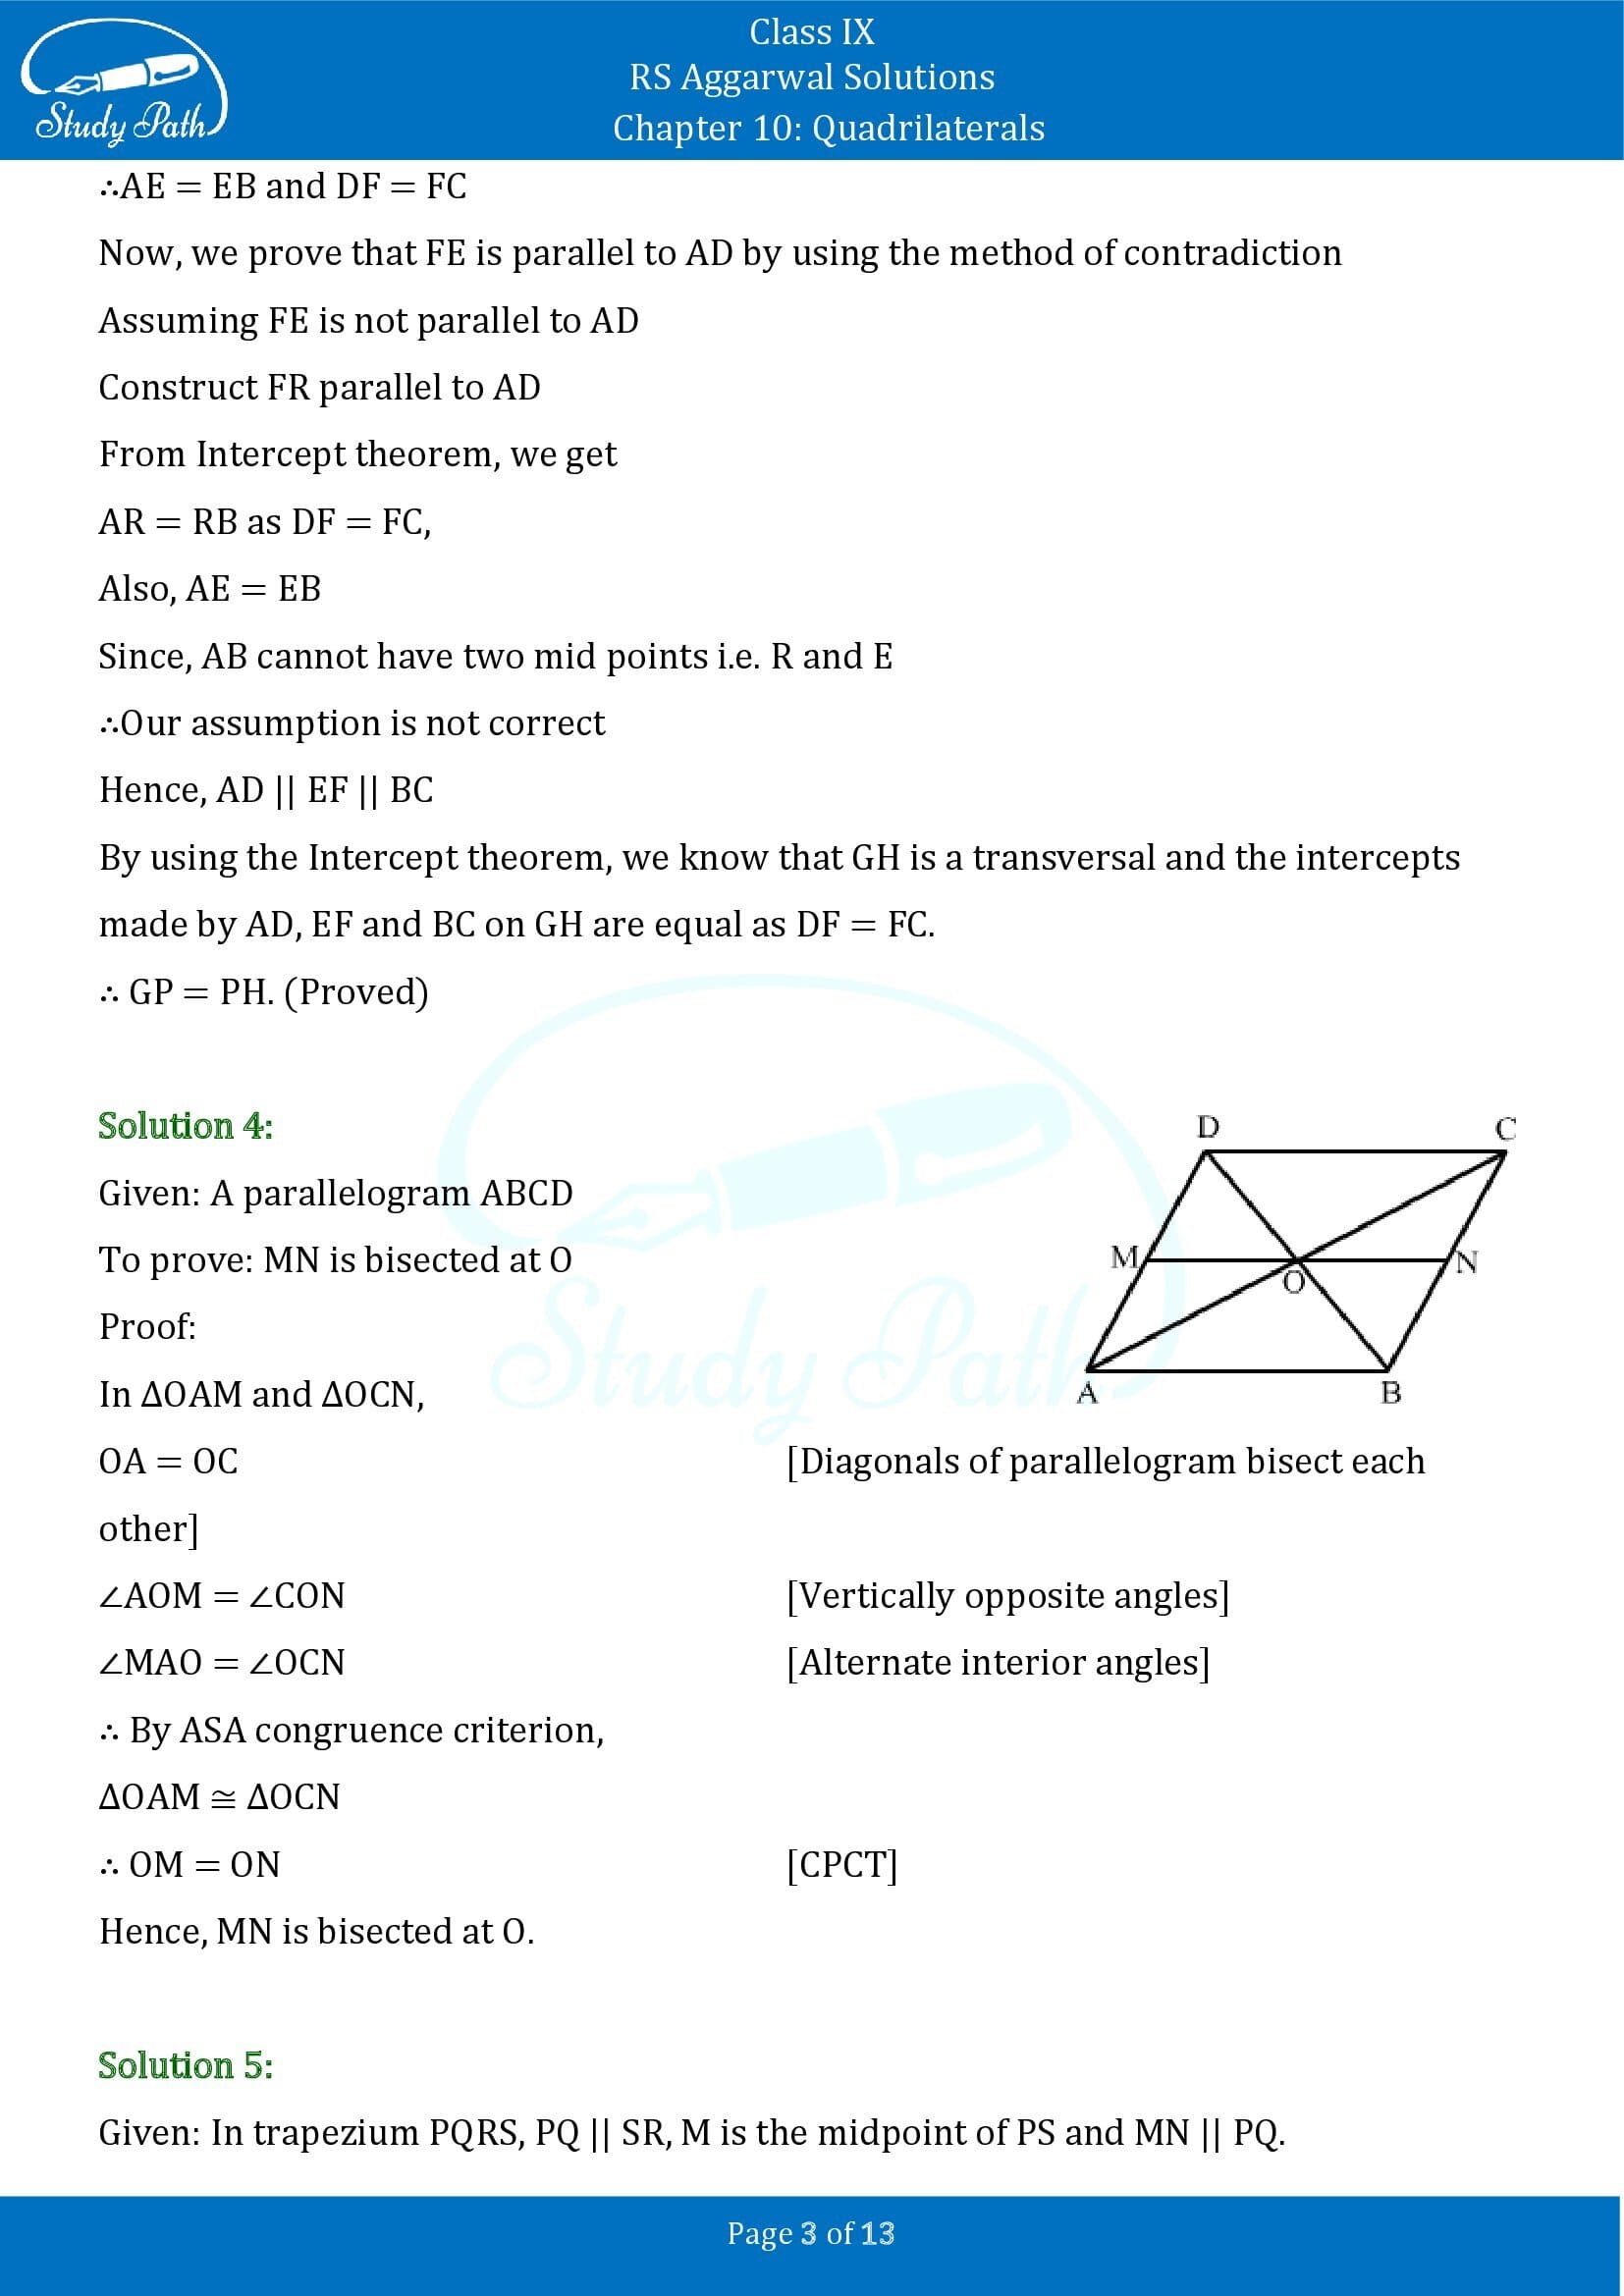 RS Aggarwal Solutions Class 9 Chapter 10 Quadrilaterals Exercise 10C 00003